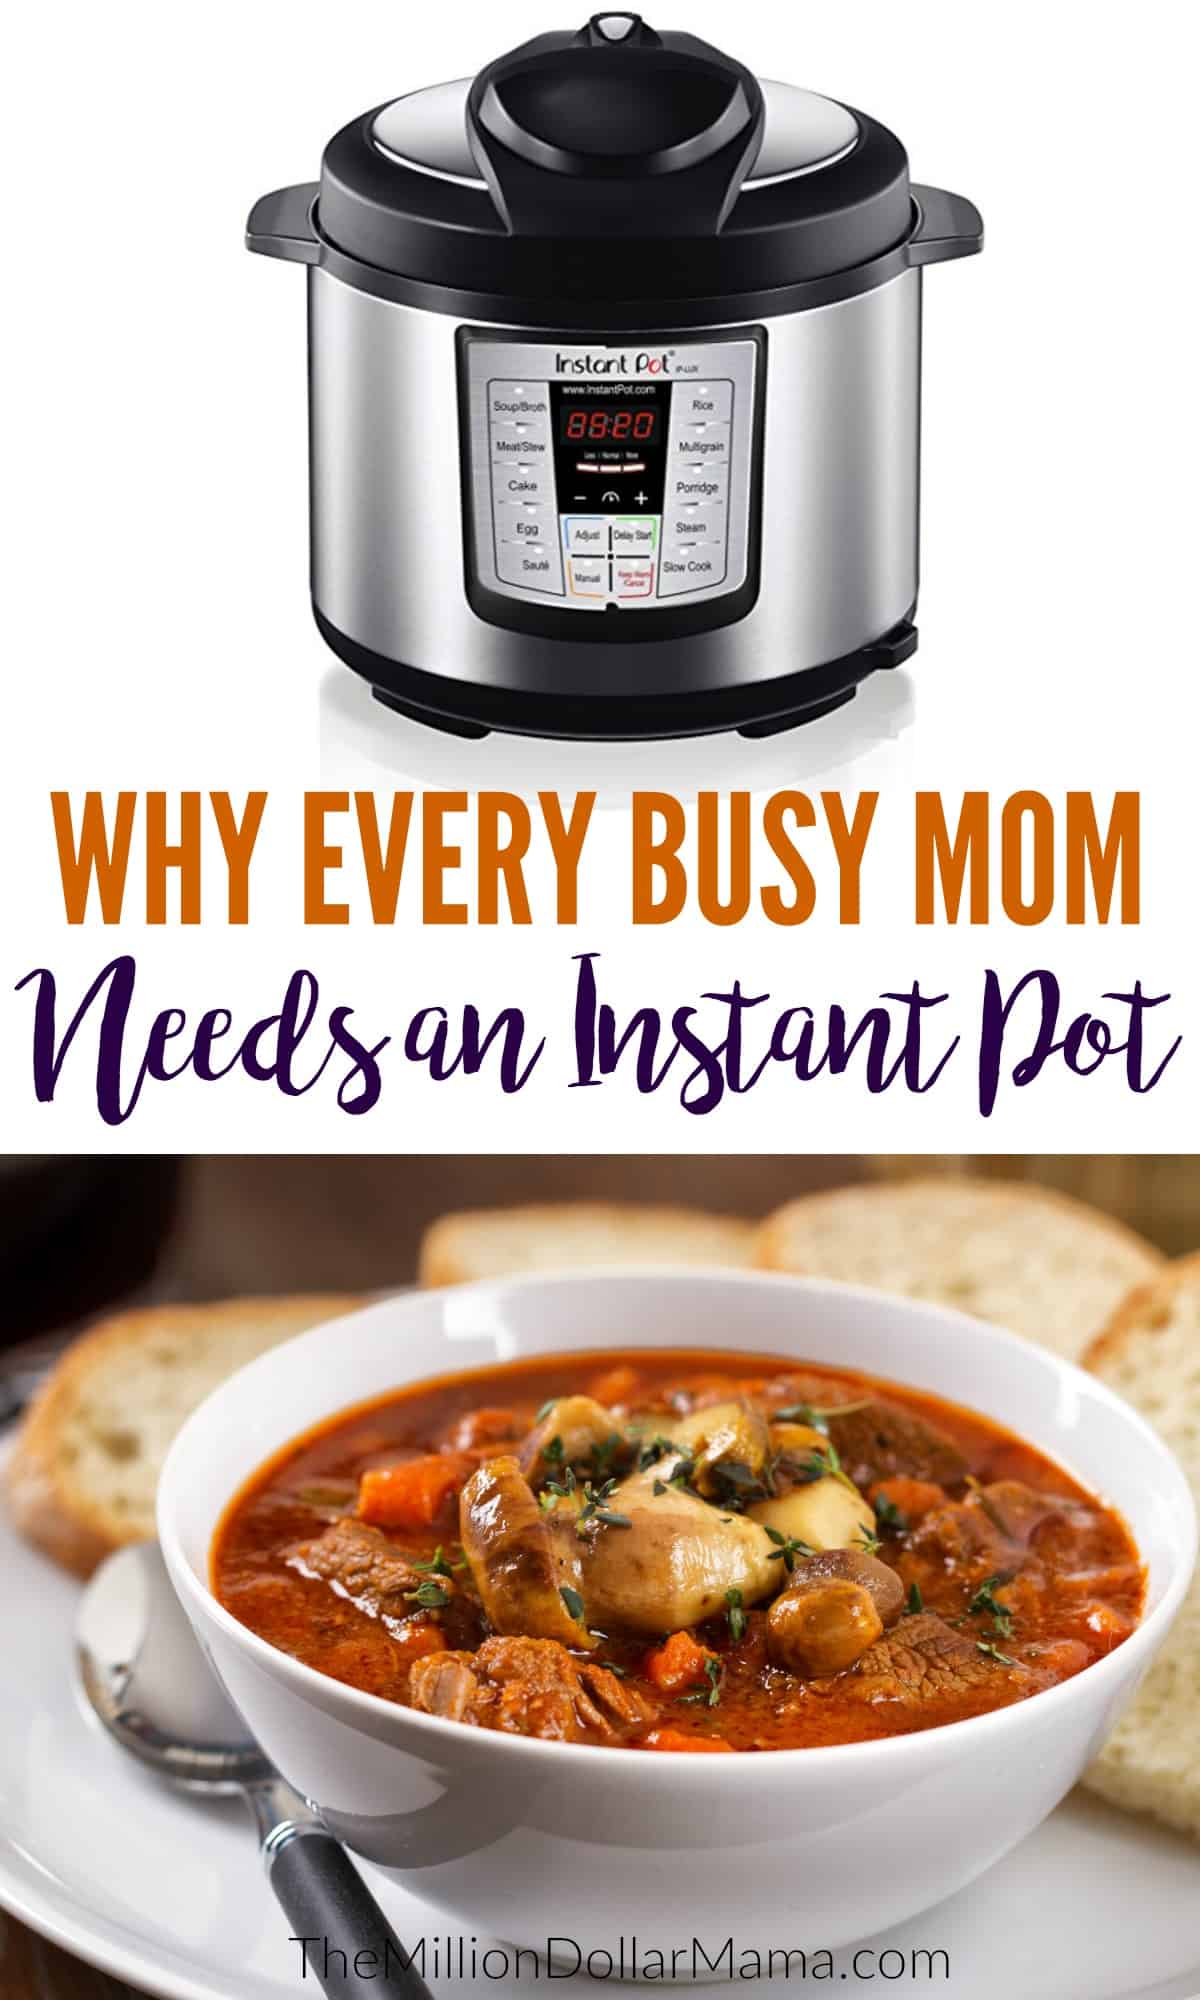 For busy moms struggling to get dinner on the table every night, the instant pot is a lifesaver! Find out all about the instant pot, the best features of the instant pot, and how it can help you get dinner ready in a flash!